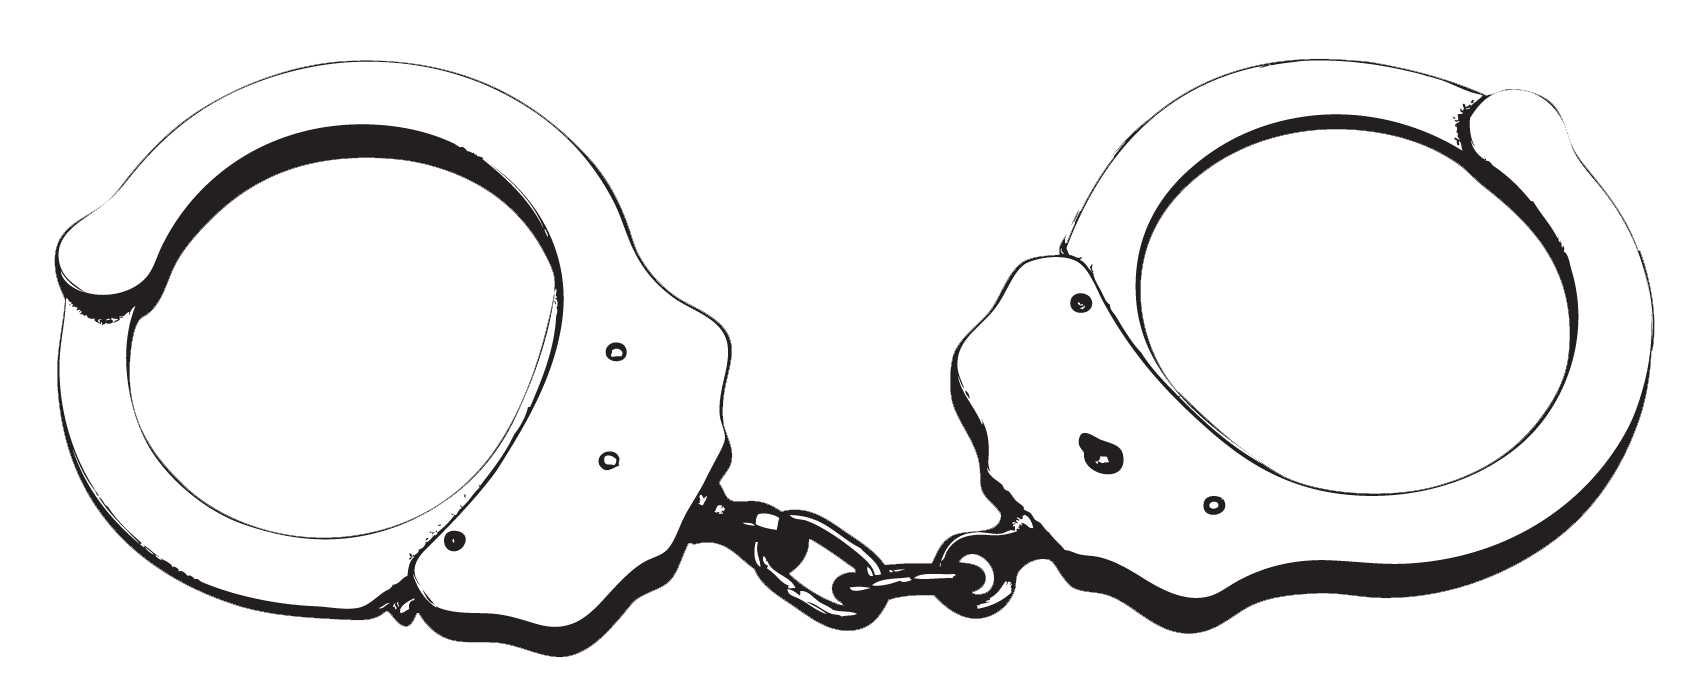 Handcuffs coloring pages best. Handcuff clipart cuffed hand